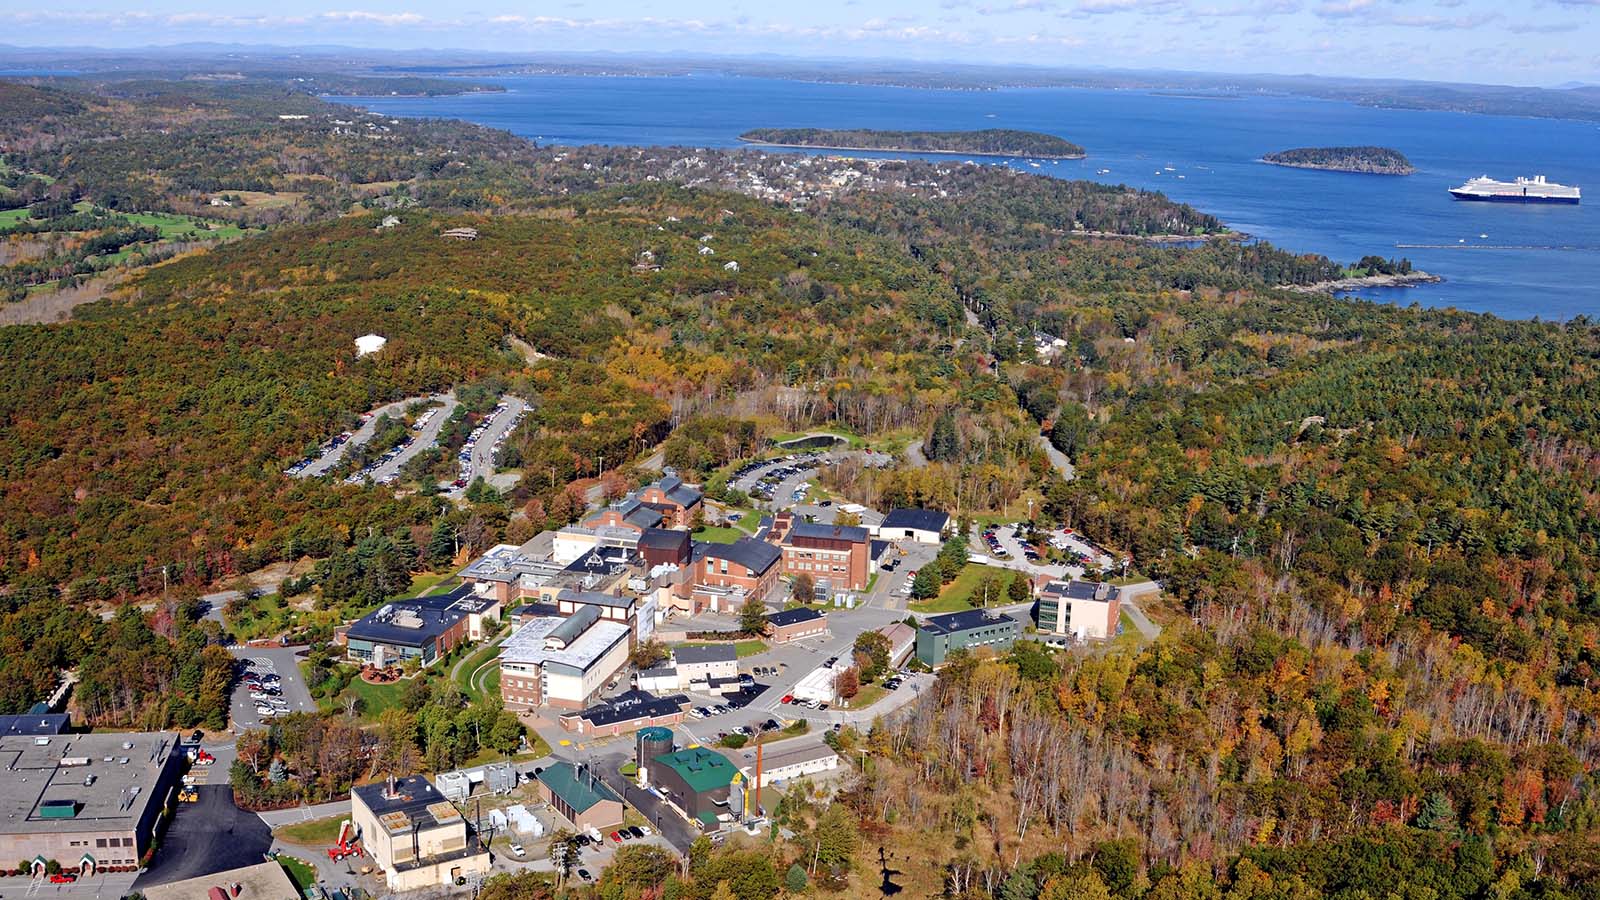 An aerial photo of The Jackson Laboratory campus in Bar Harbor, Maine taken in 2011